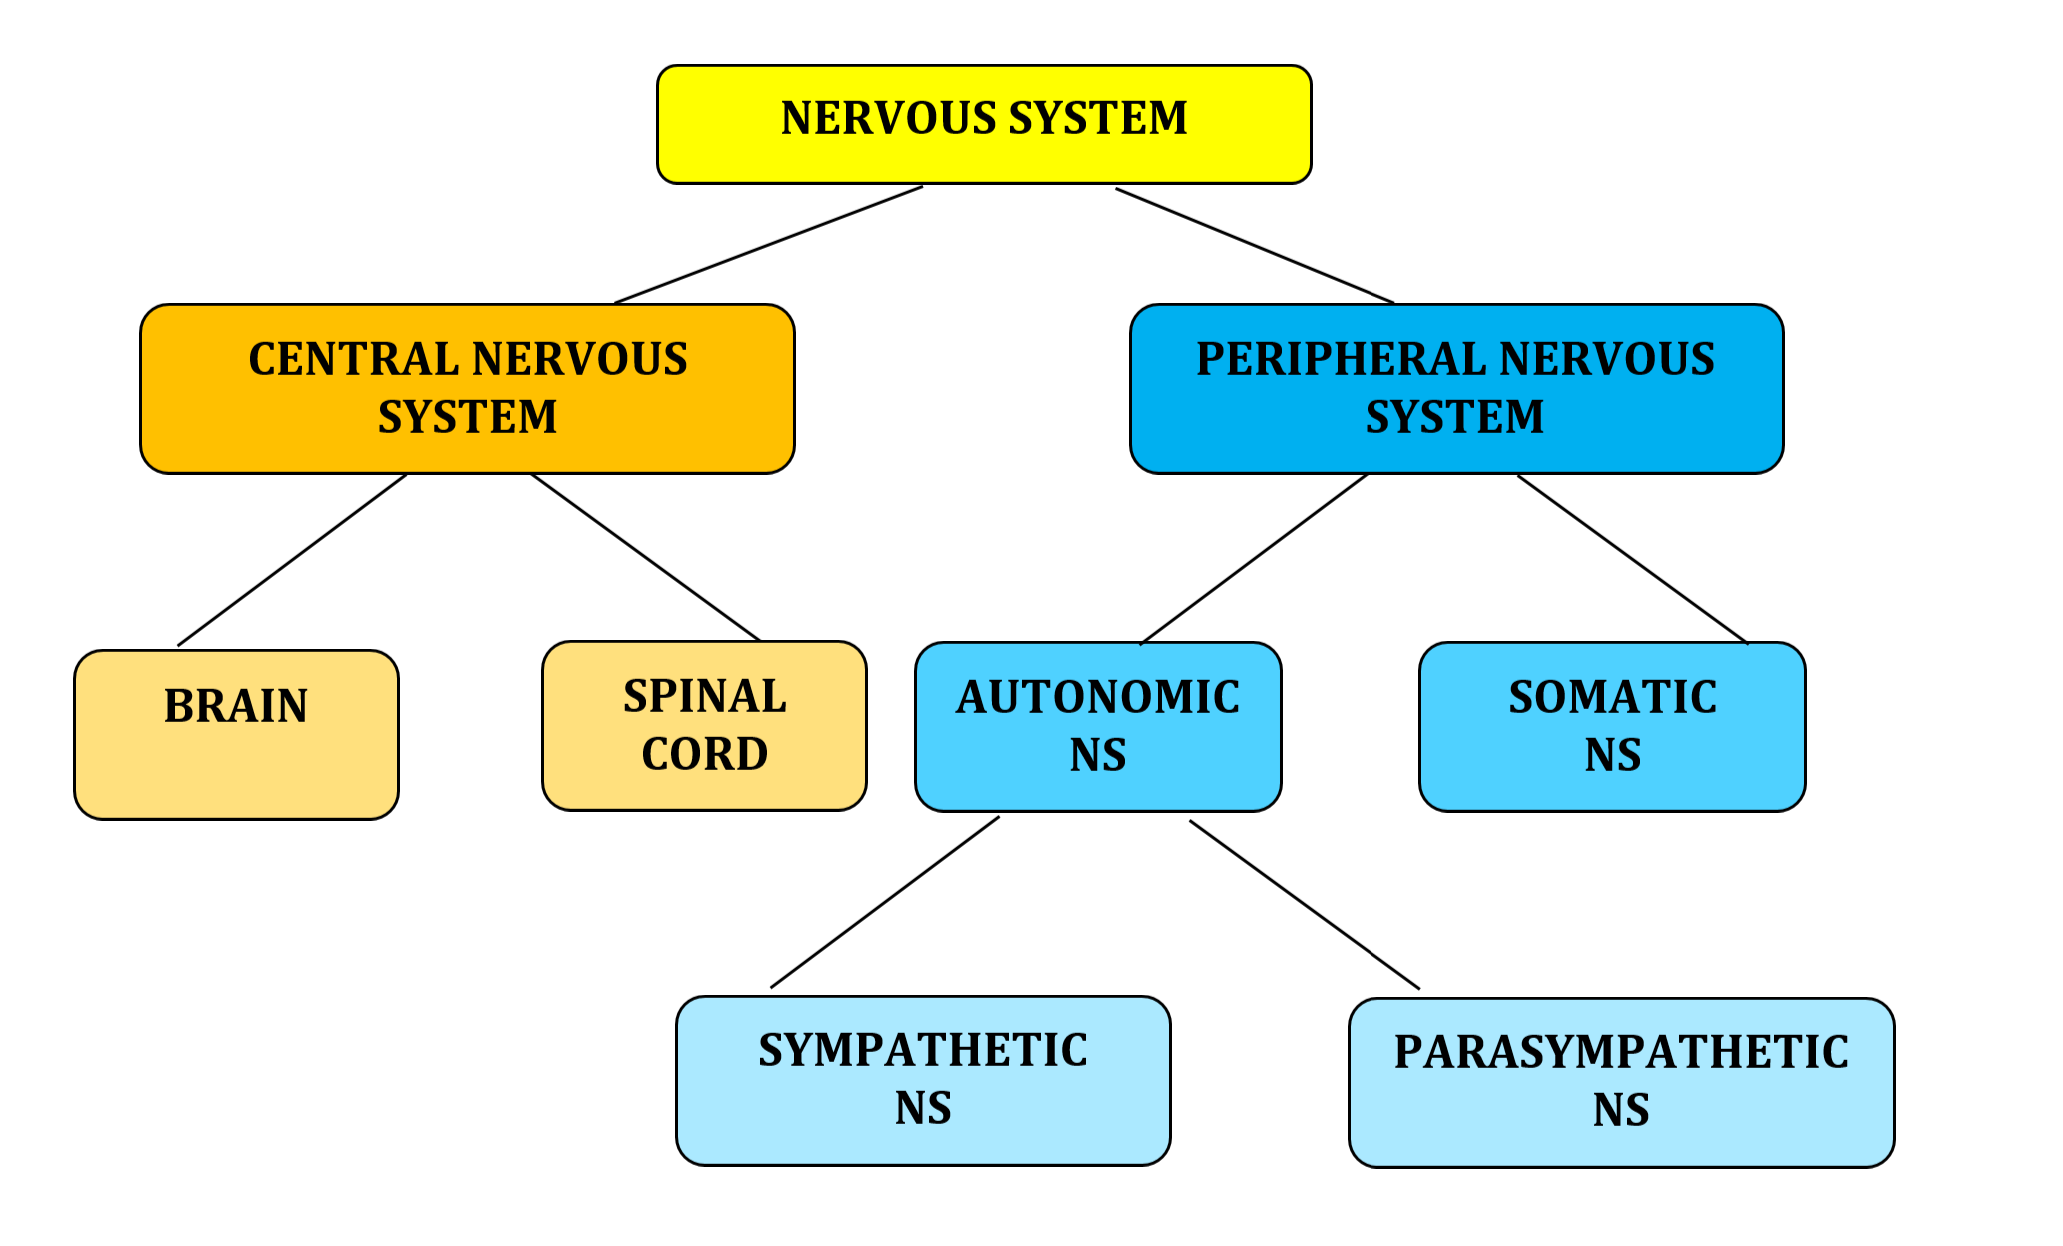 central nervous system and peripheral nervous system chart